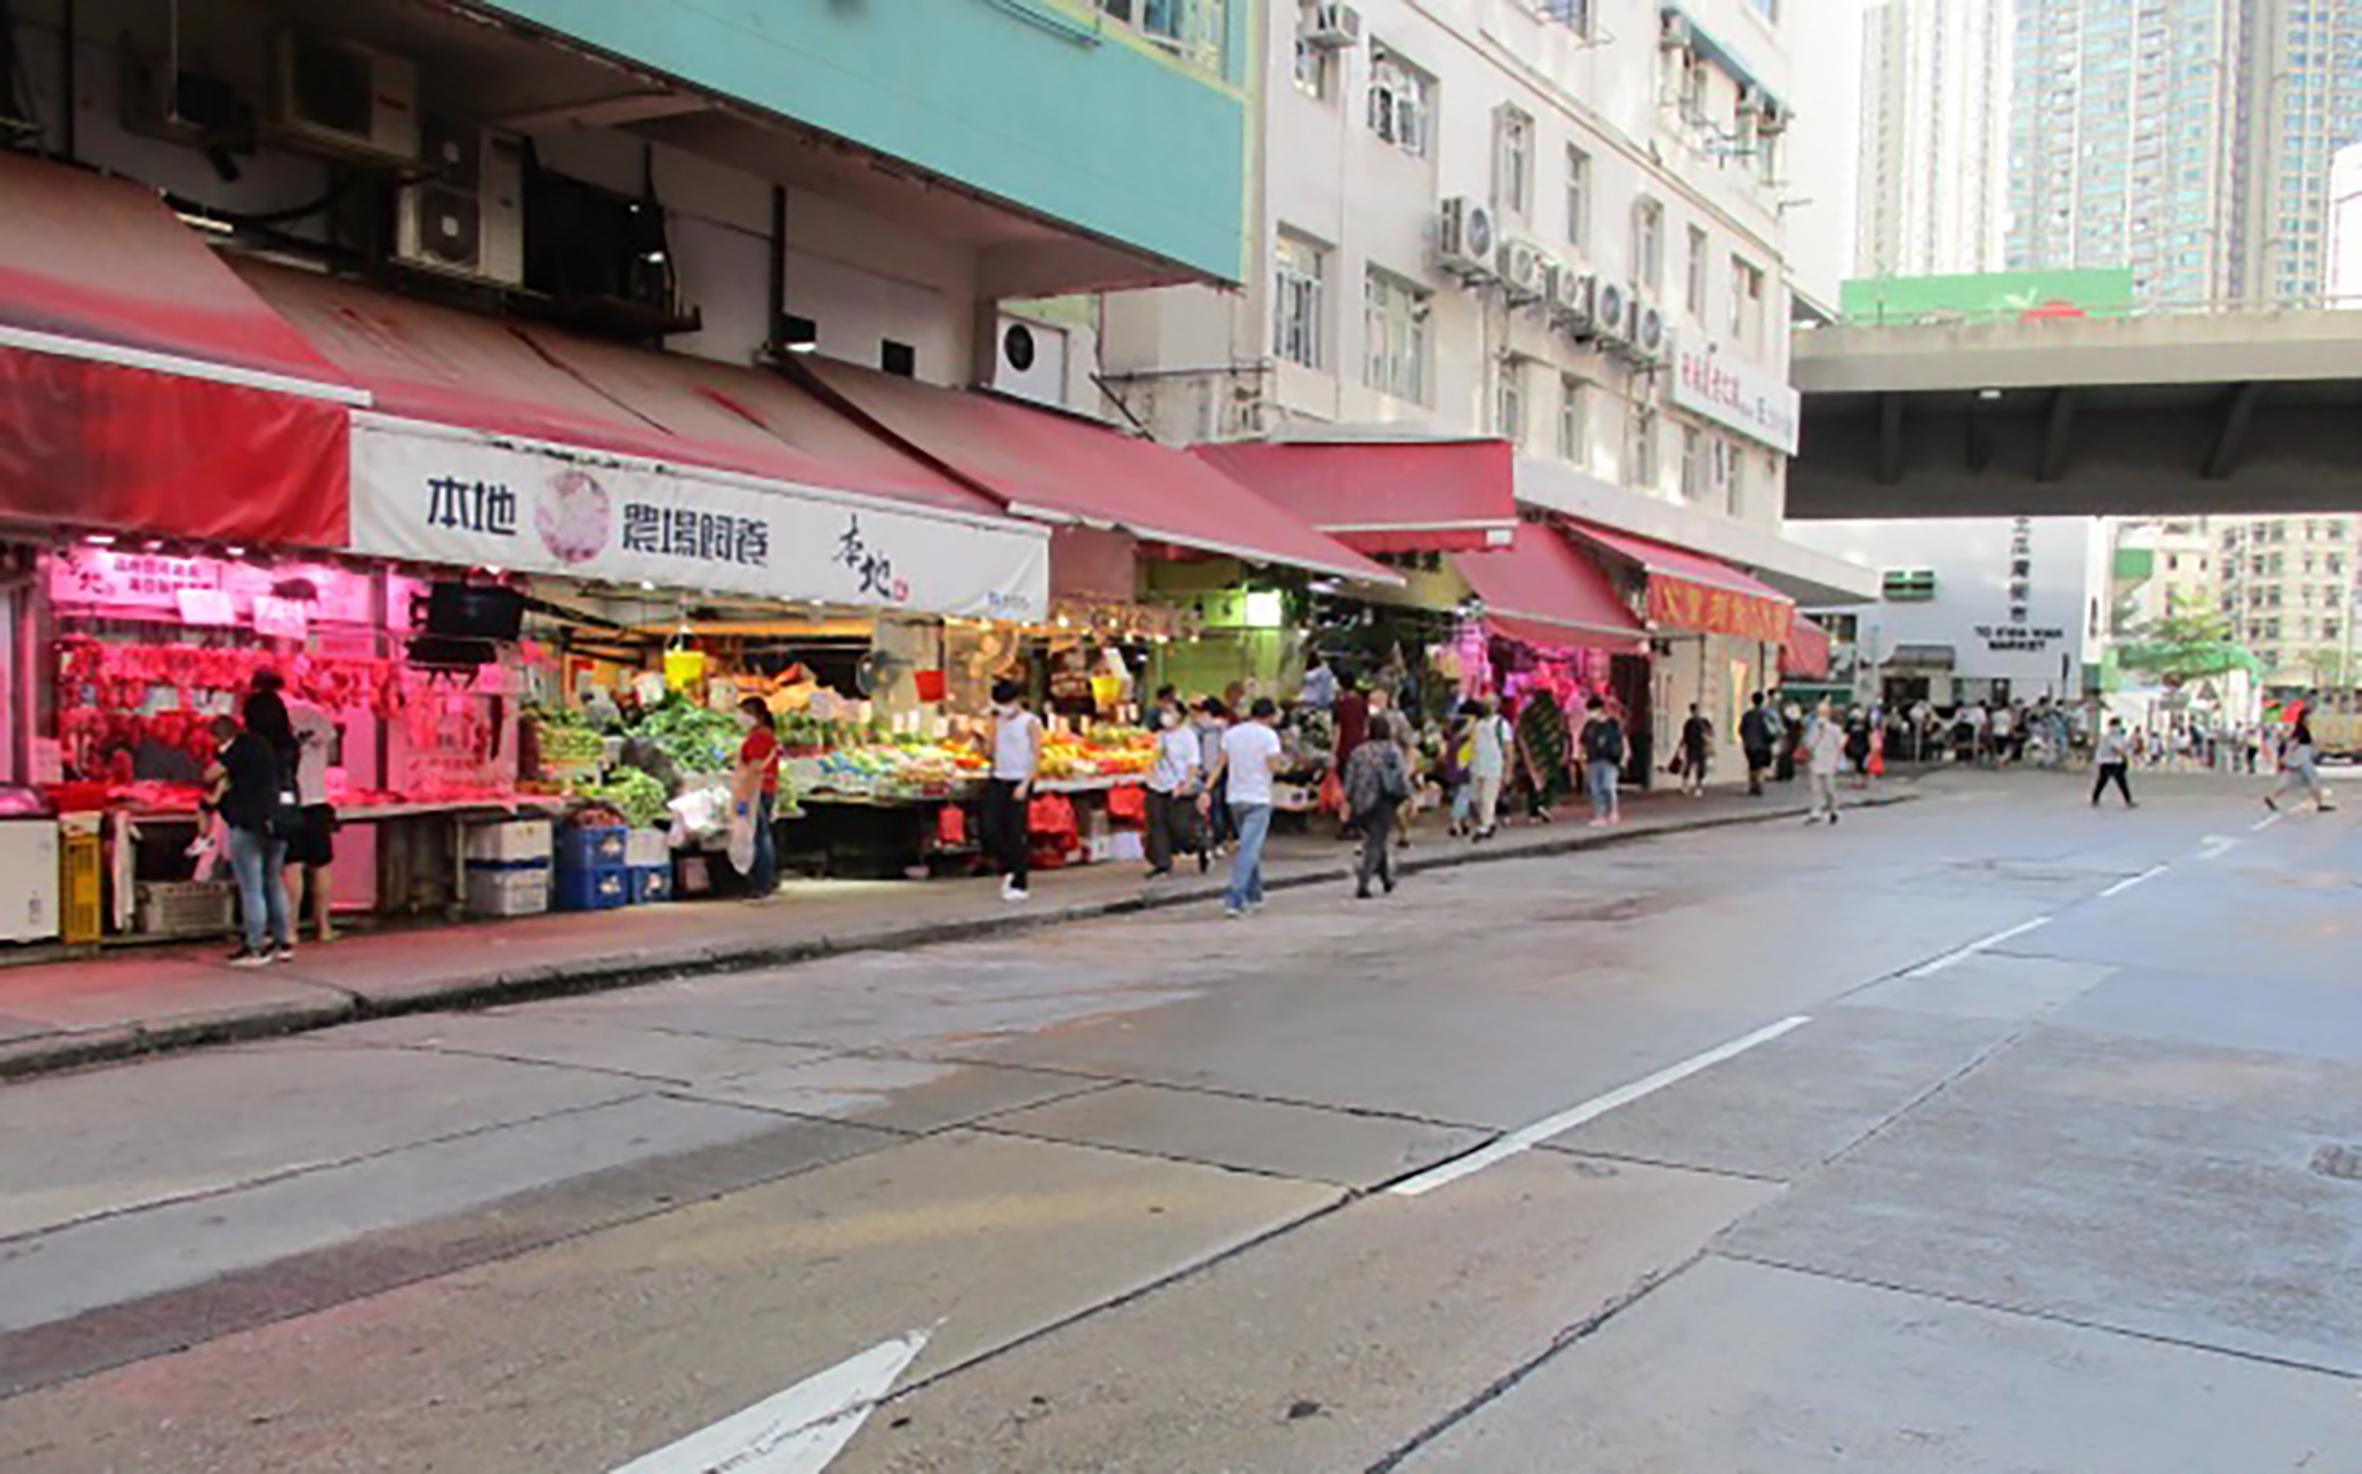 A spokesman for the Food and Environmental Hygiene Department (FEHD) said today (October 7) that the FEHD and the Hong Kong Police Force have started a series of stringent enforcement actions against illegal shop front extension activities in various districts since October 3. Photo shows the condition of areas in Kowloon City after an operation yesterday (October 6).
